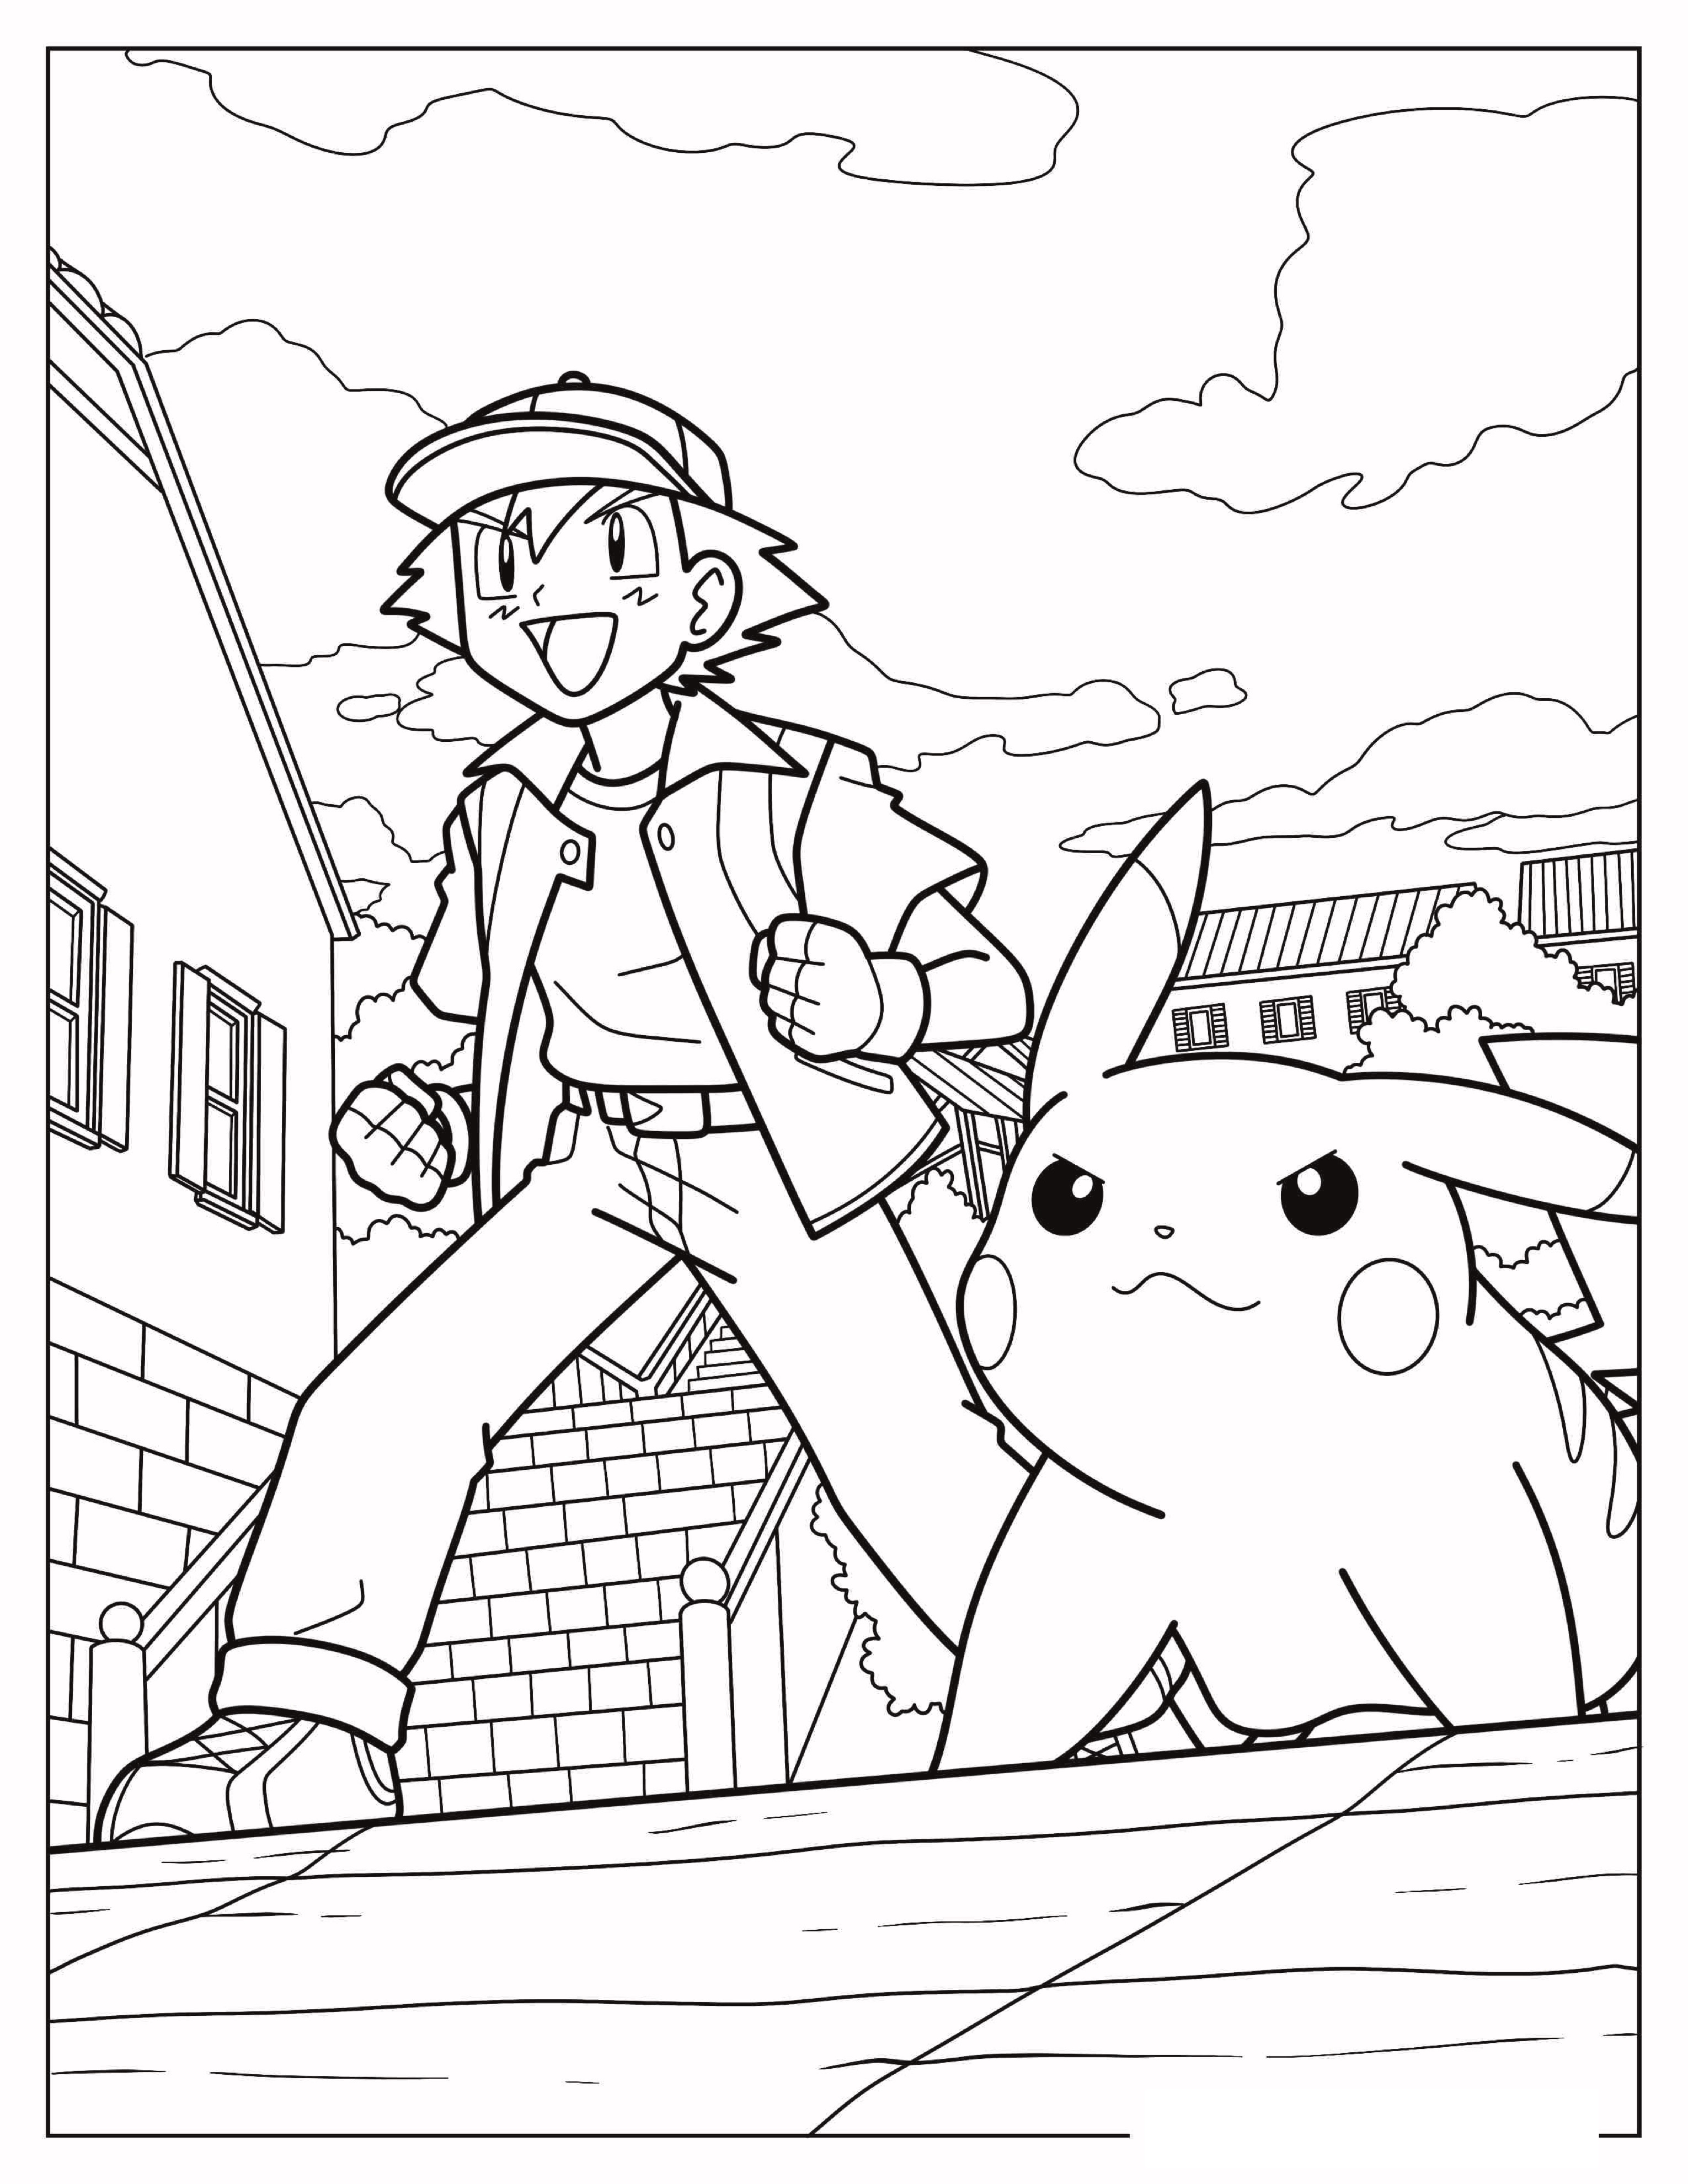 Detailed-Coloring-Page-Of-Ash-And-Pikachu.jpg